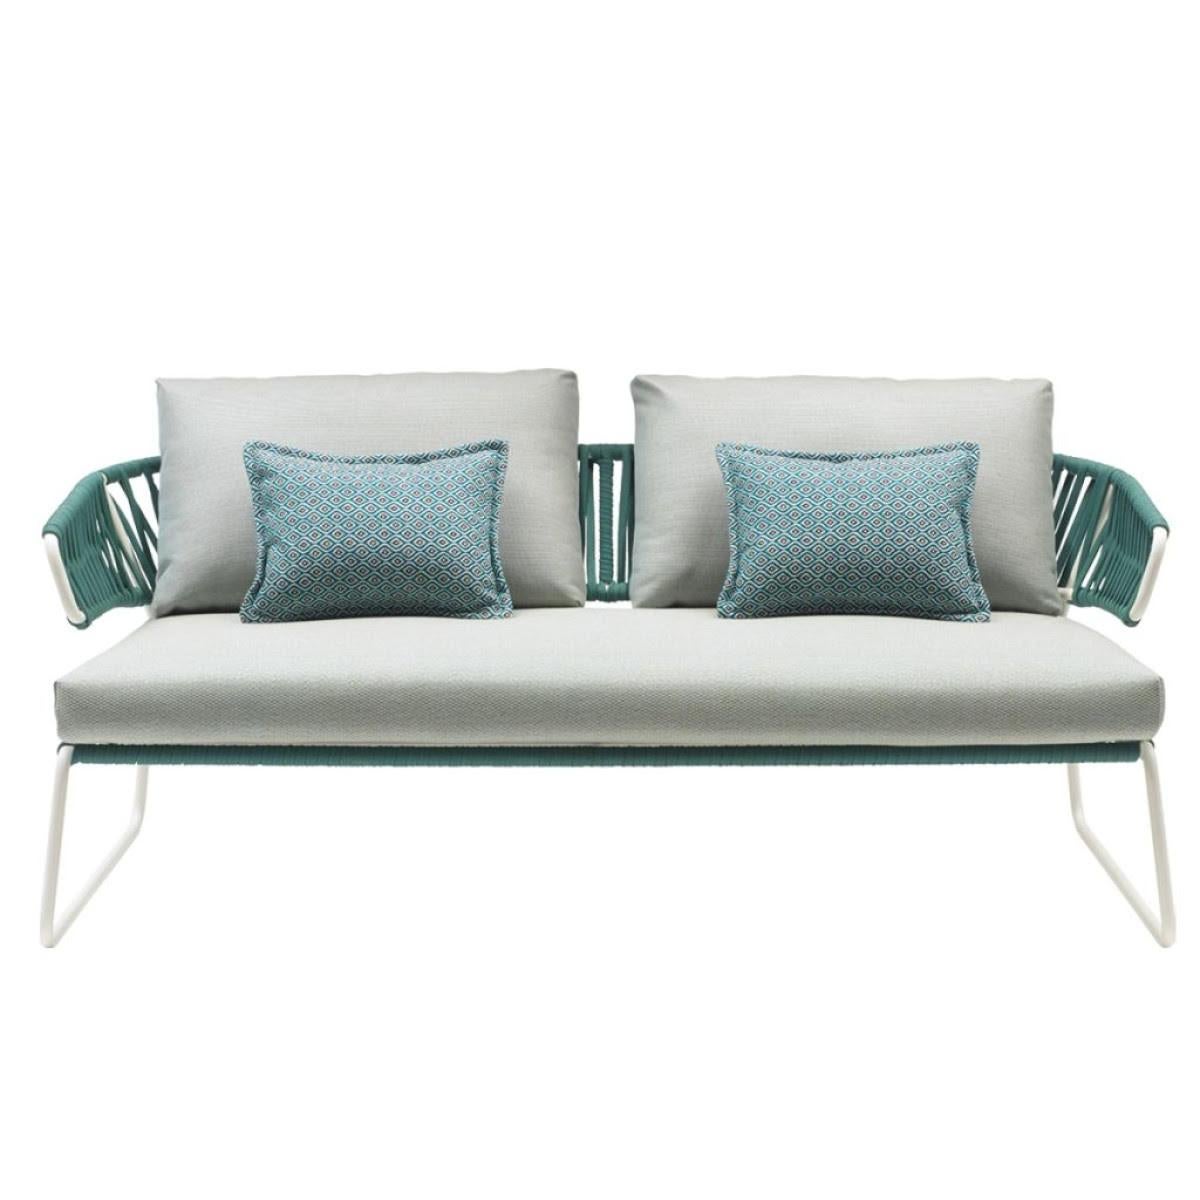 Modern Green Outdoor or Indoor Sofa in Metal and Cord, 21 century
Modern production sofa for outdoor or indoor use. The frame is made of metal and reinforced with ropes on the back and seat. This sofa has an innovative, modern and fresh design.
The